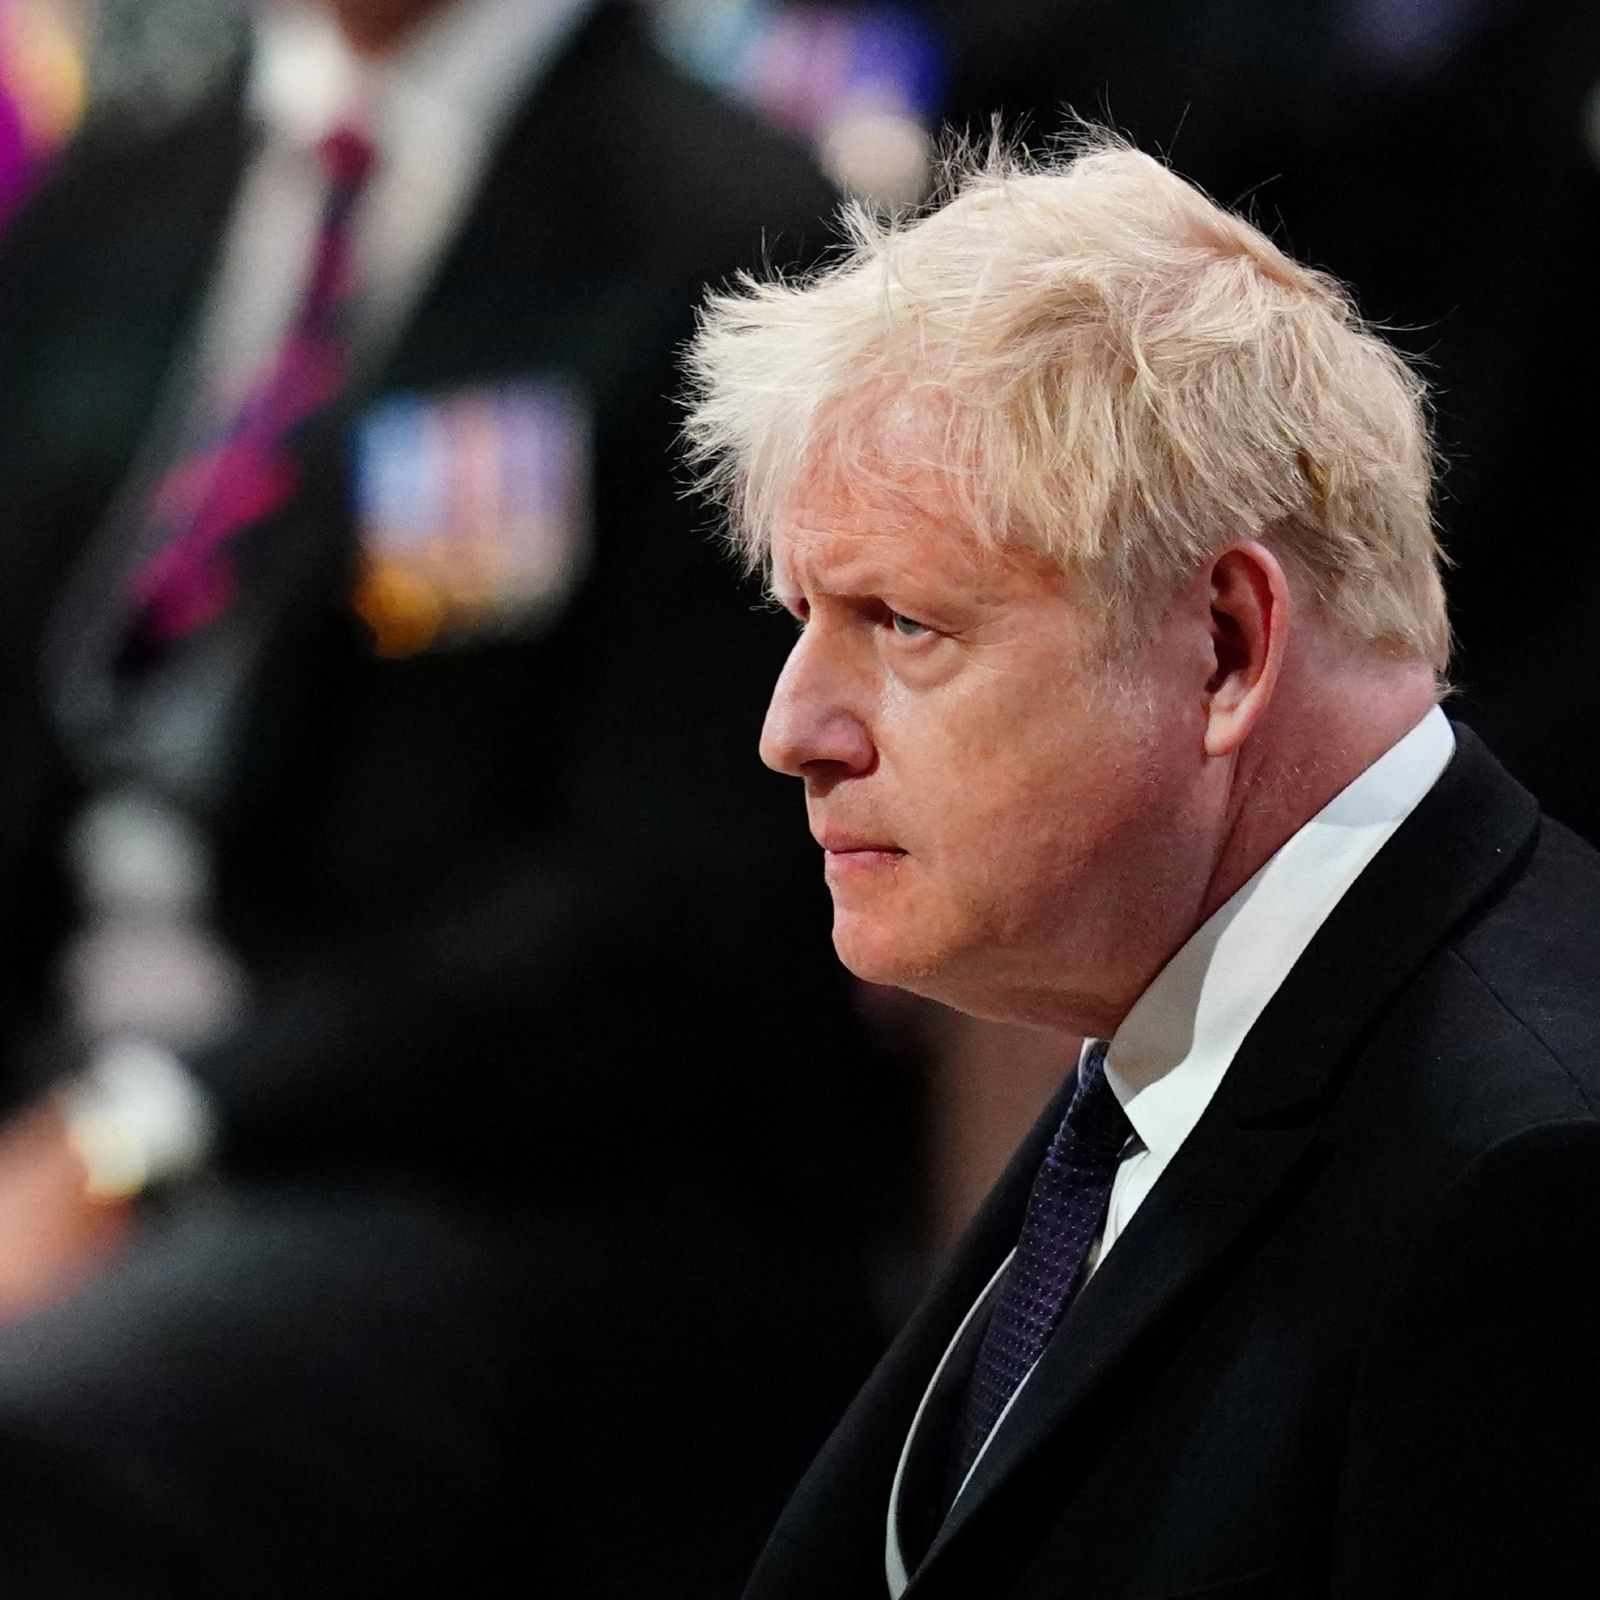 Is it possible to remove Boris Johnson from his position, and if so, how will it be done?